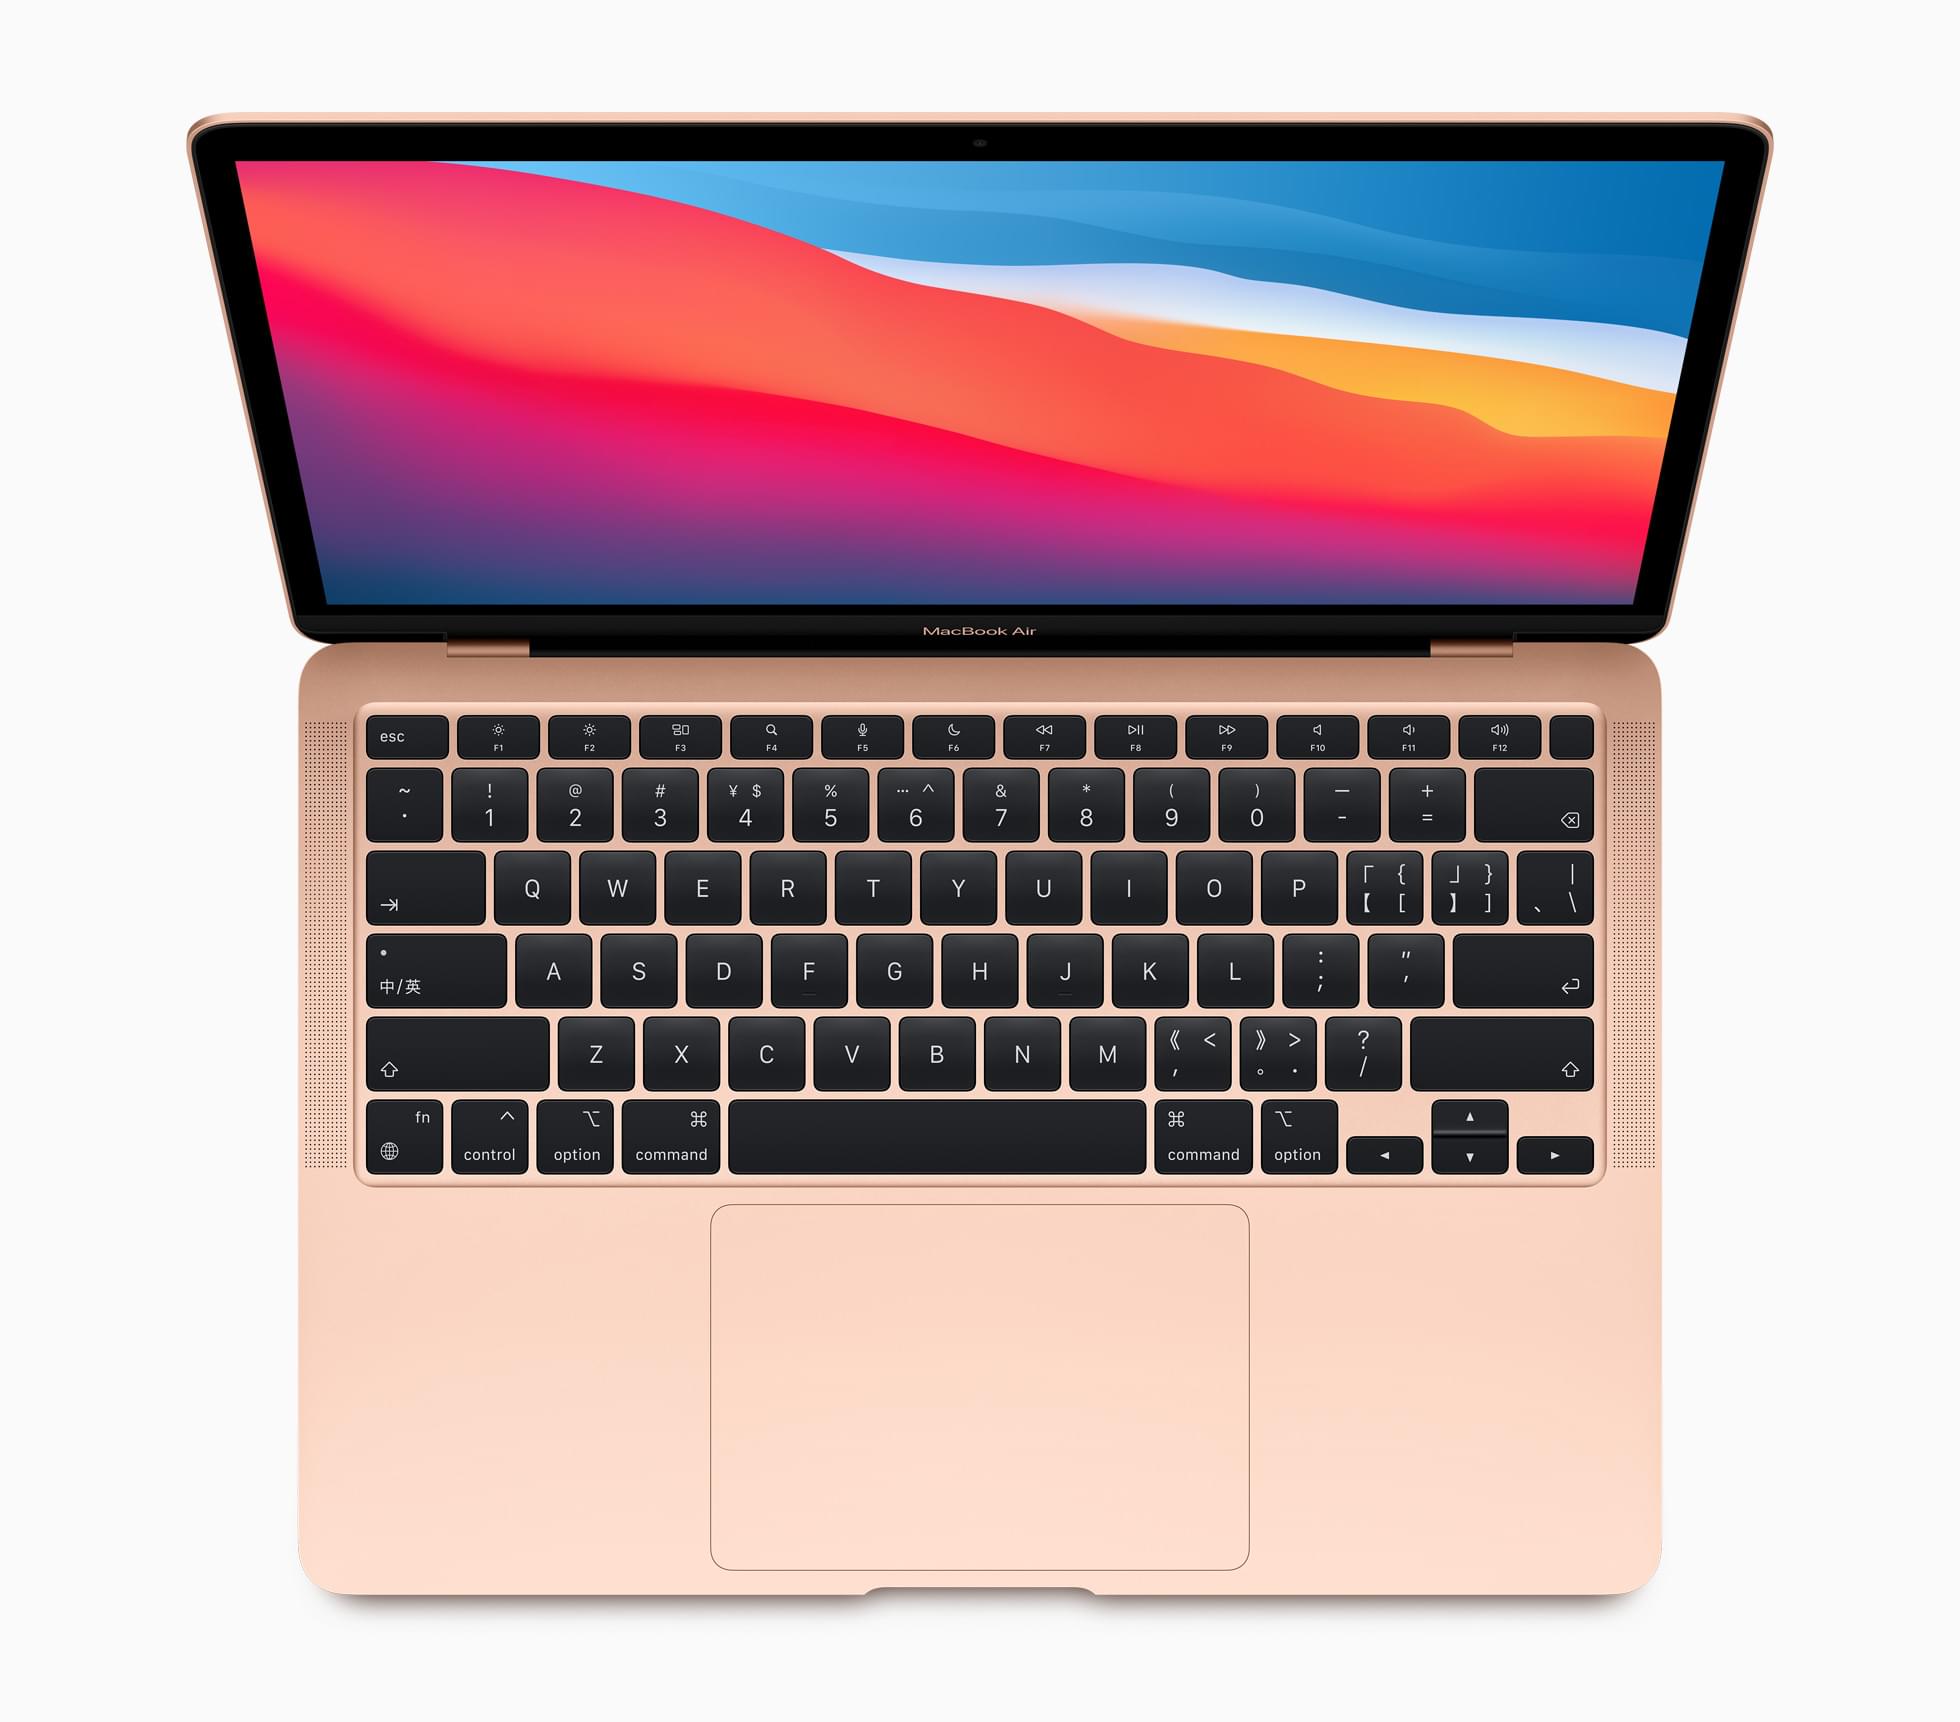 The MacBook Air includes new Spotlight, Dictation, and Do Not Disturb function keys.